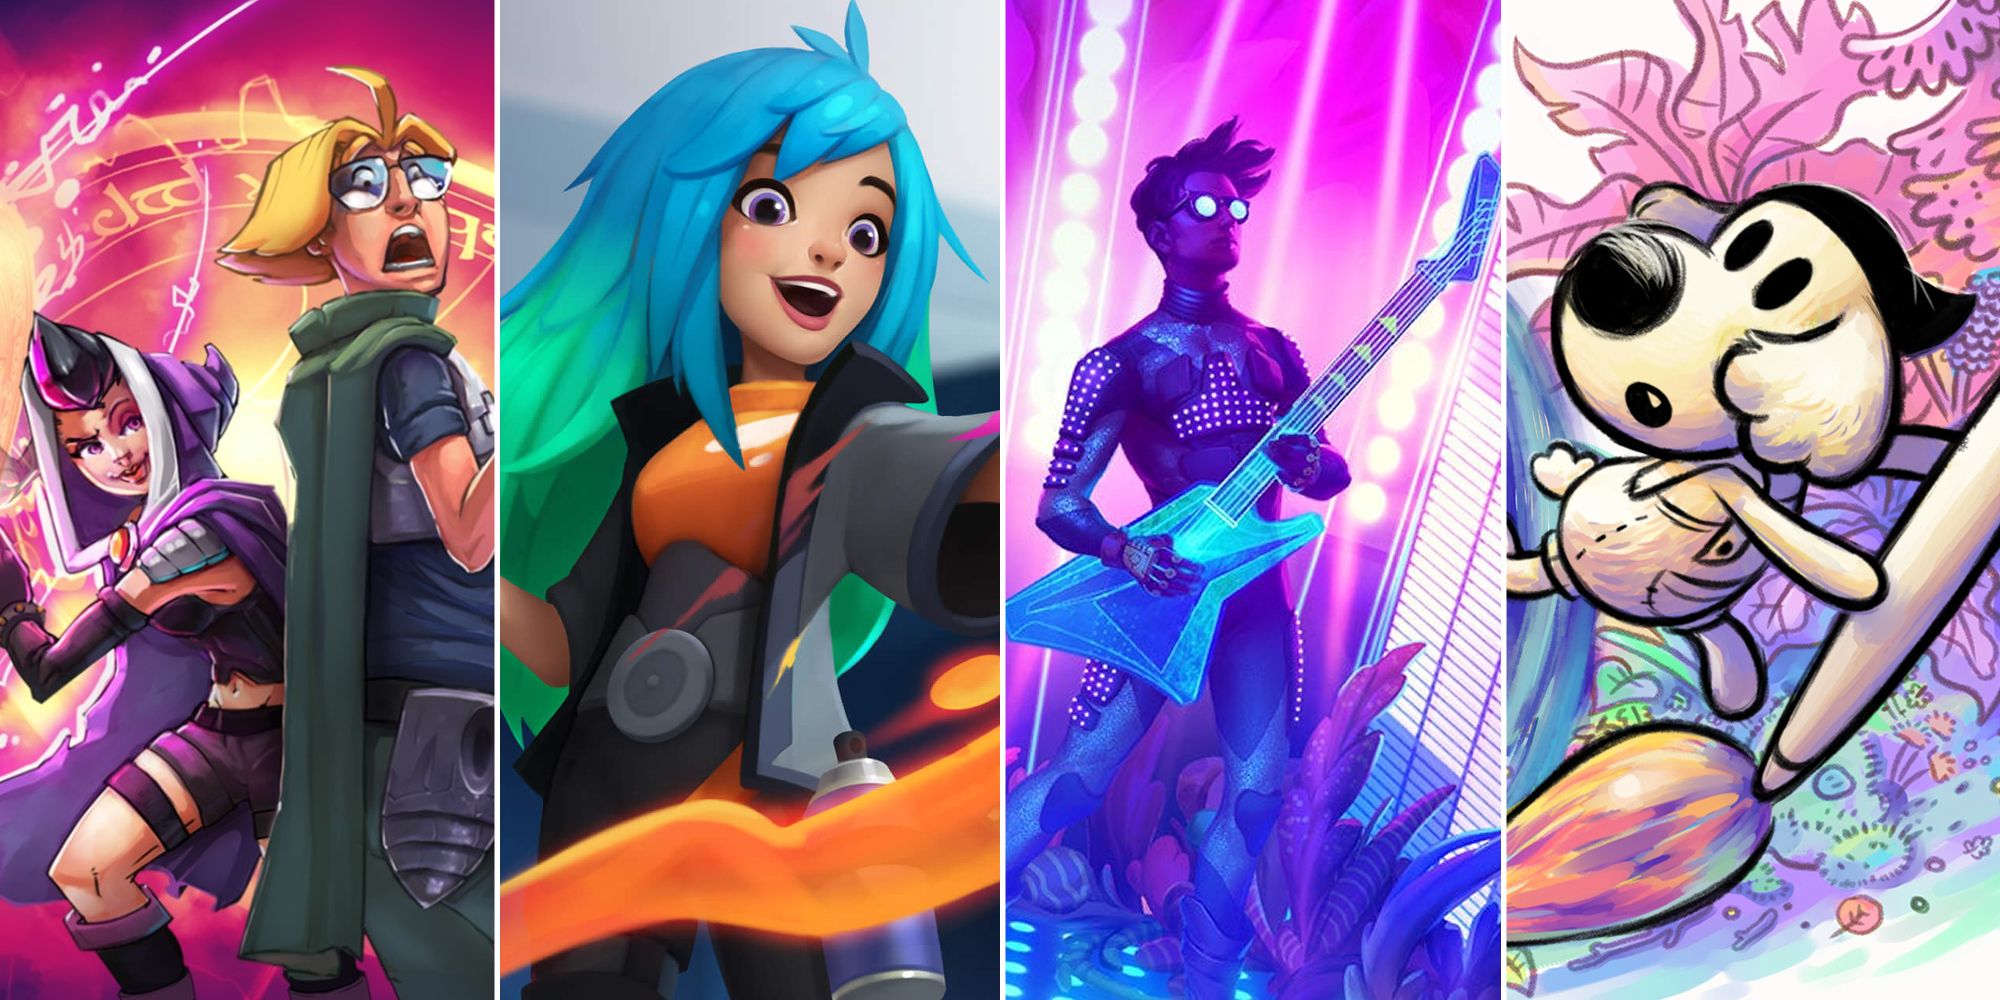 Artist Split Image Feature split image of characters from the games mentioned